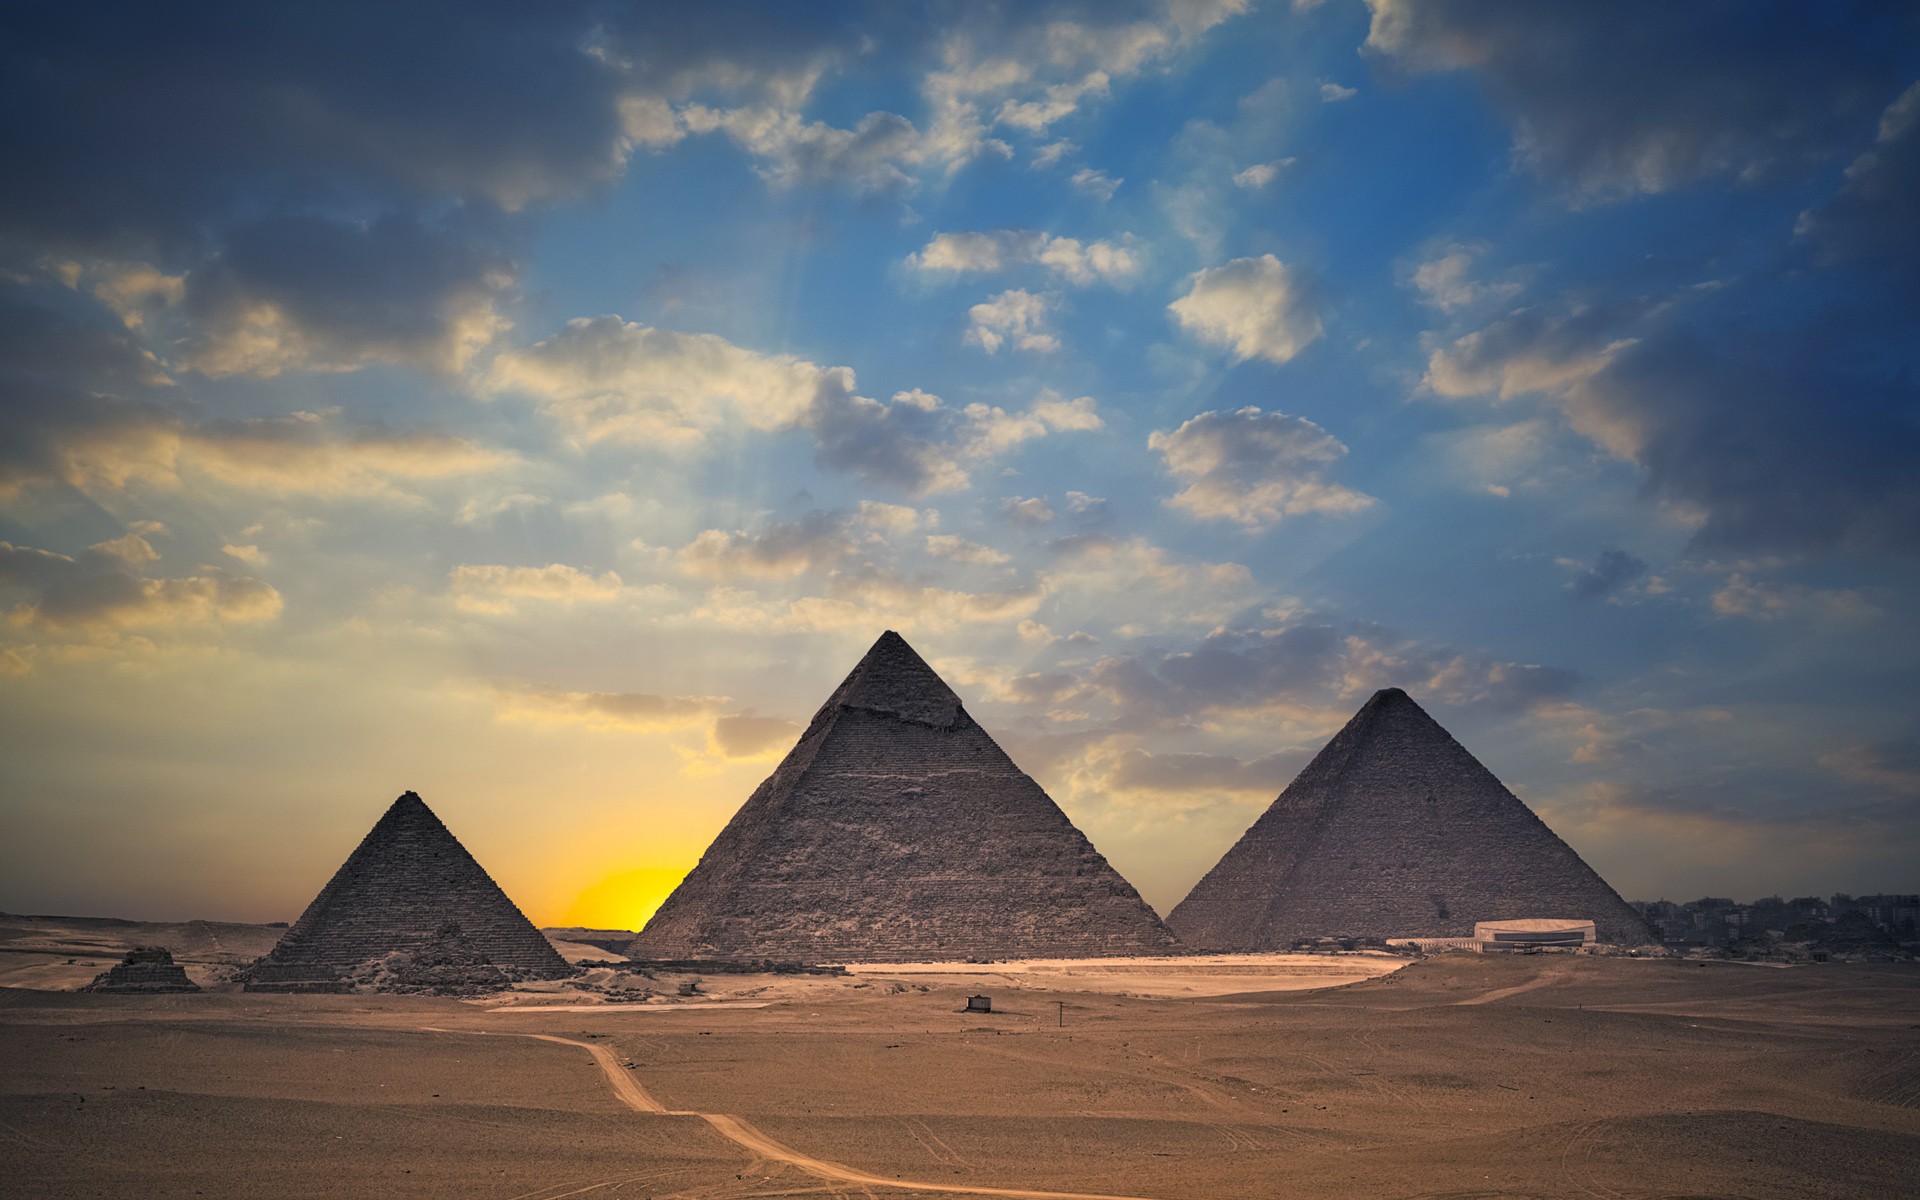 General 1920x1200 Egypt Pyramids of Giza Tourism sand landscape history sky clouds ancient landmark World Heritage Site Africa